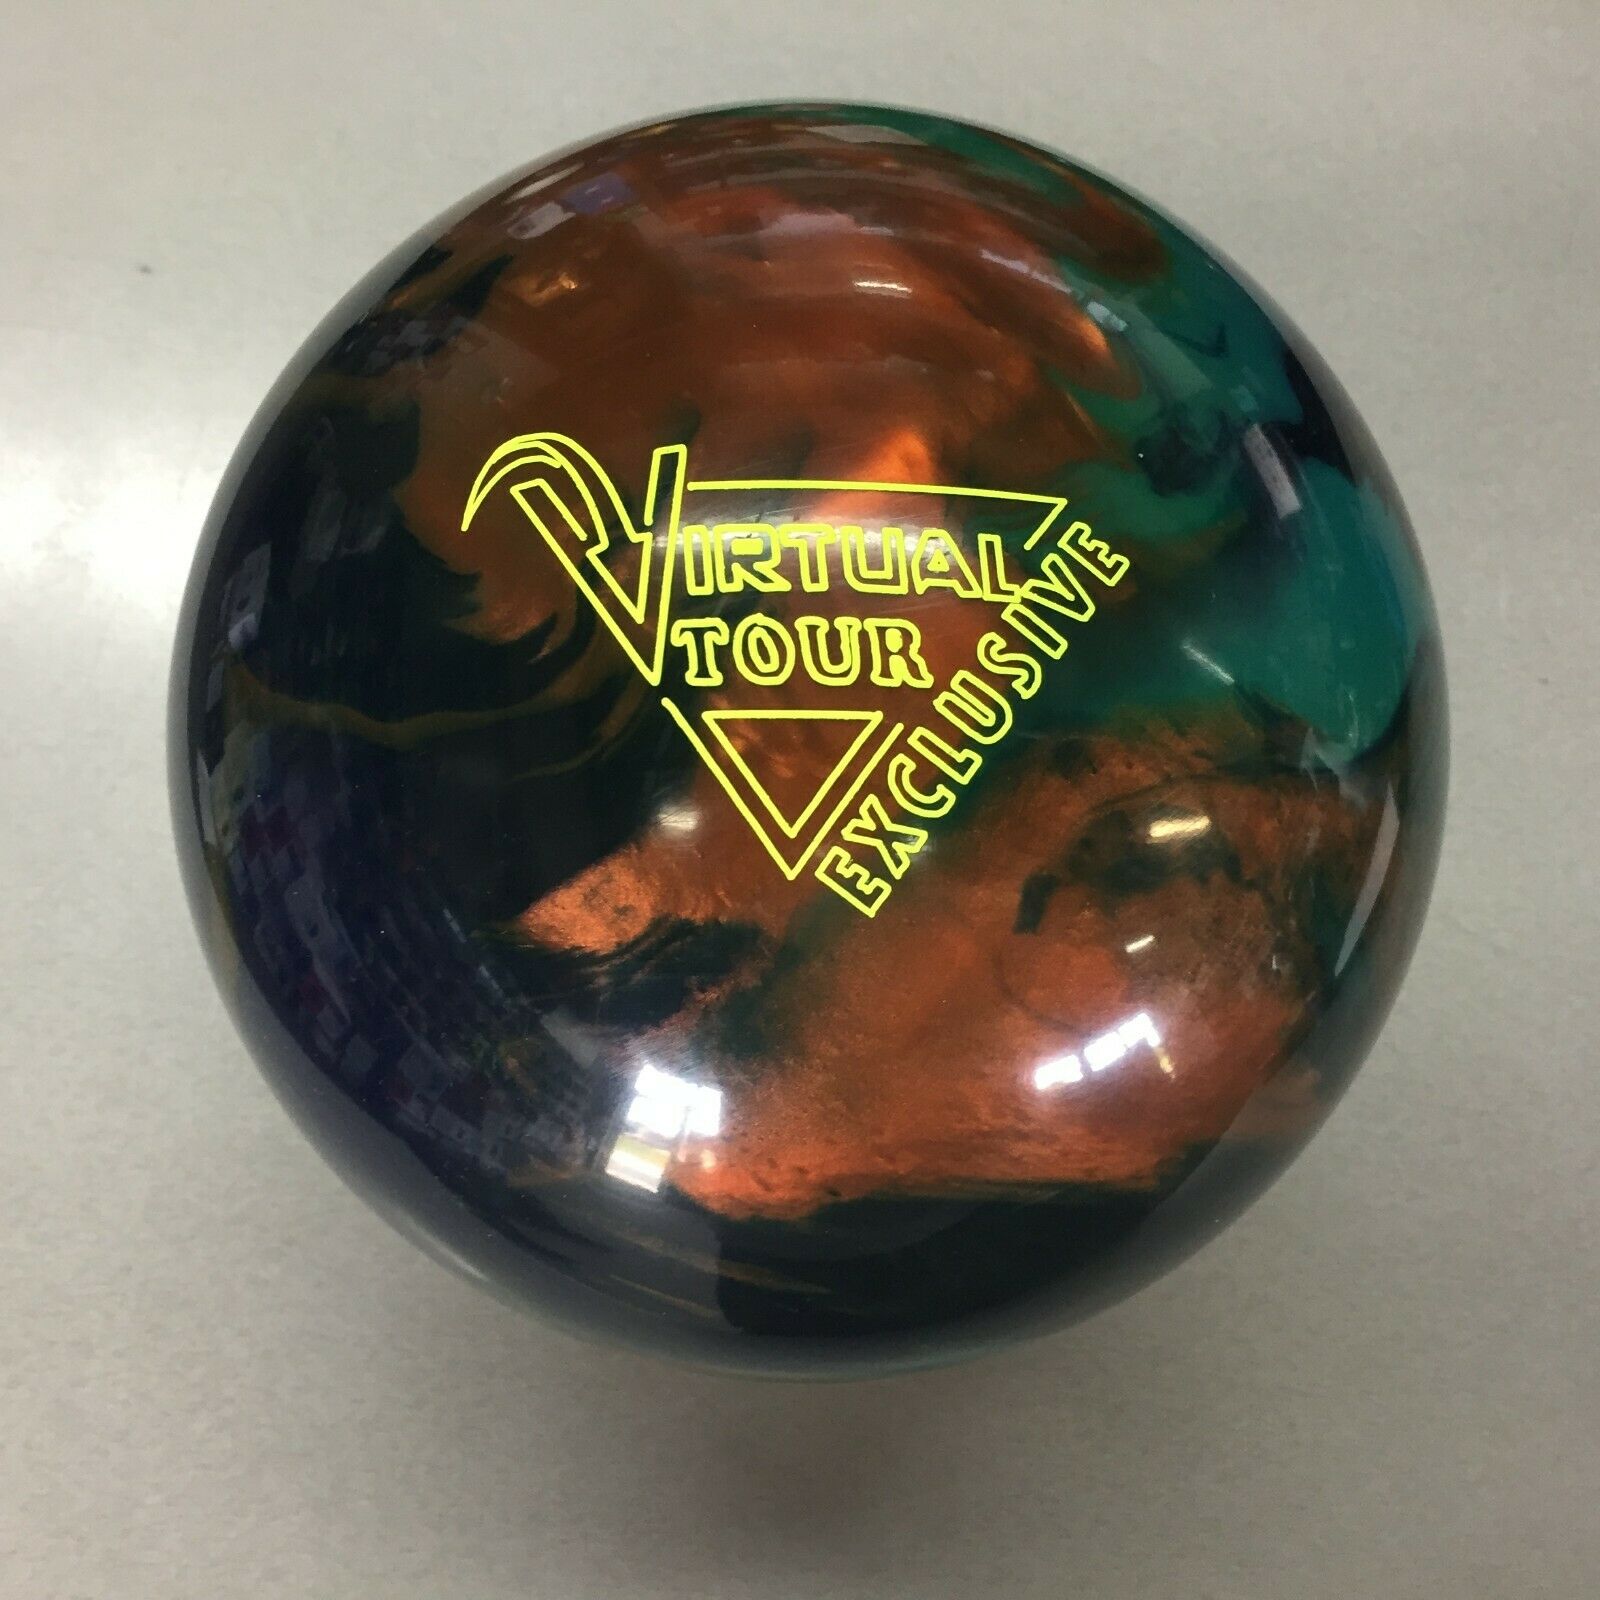 Storm Virtual Tour Exclusive  Bowling Ball 15 Lb. 1st Quality  New In Box! #031